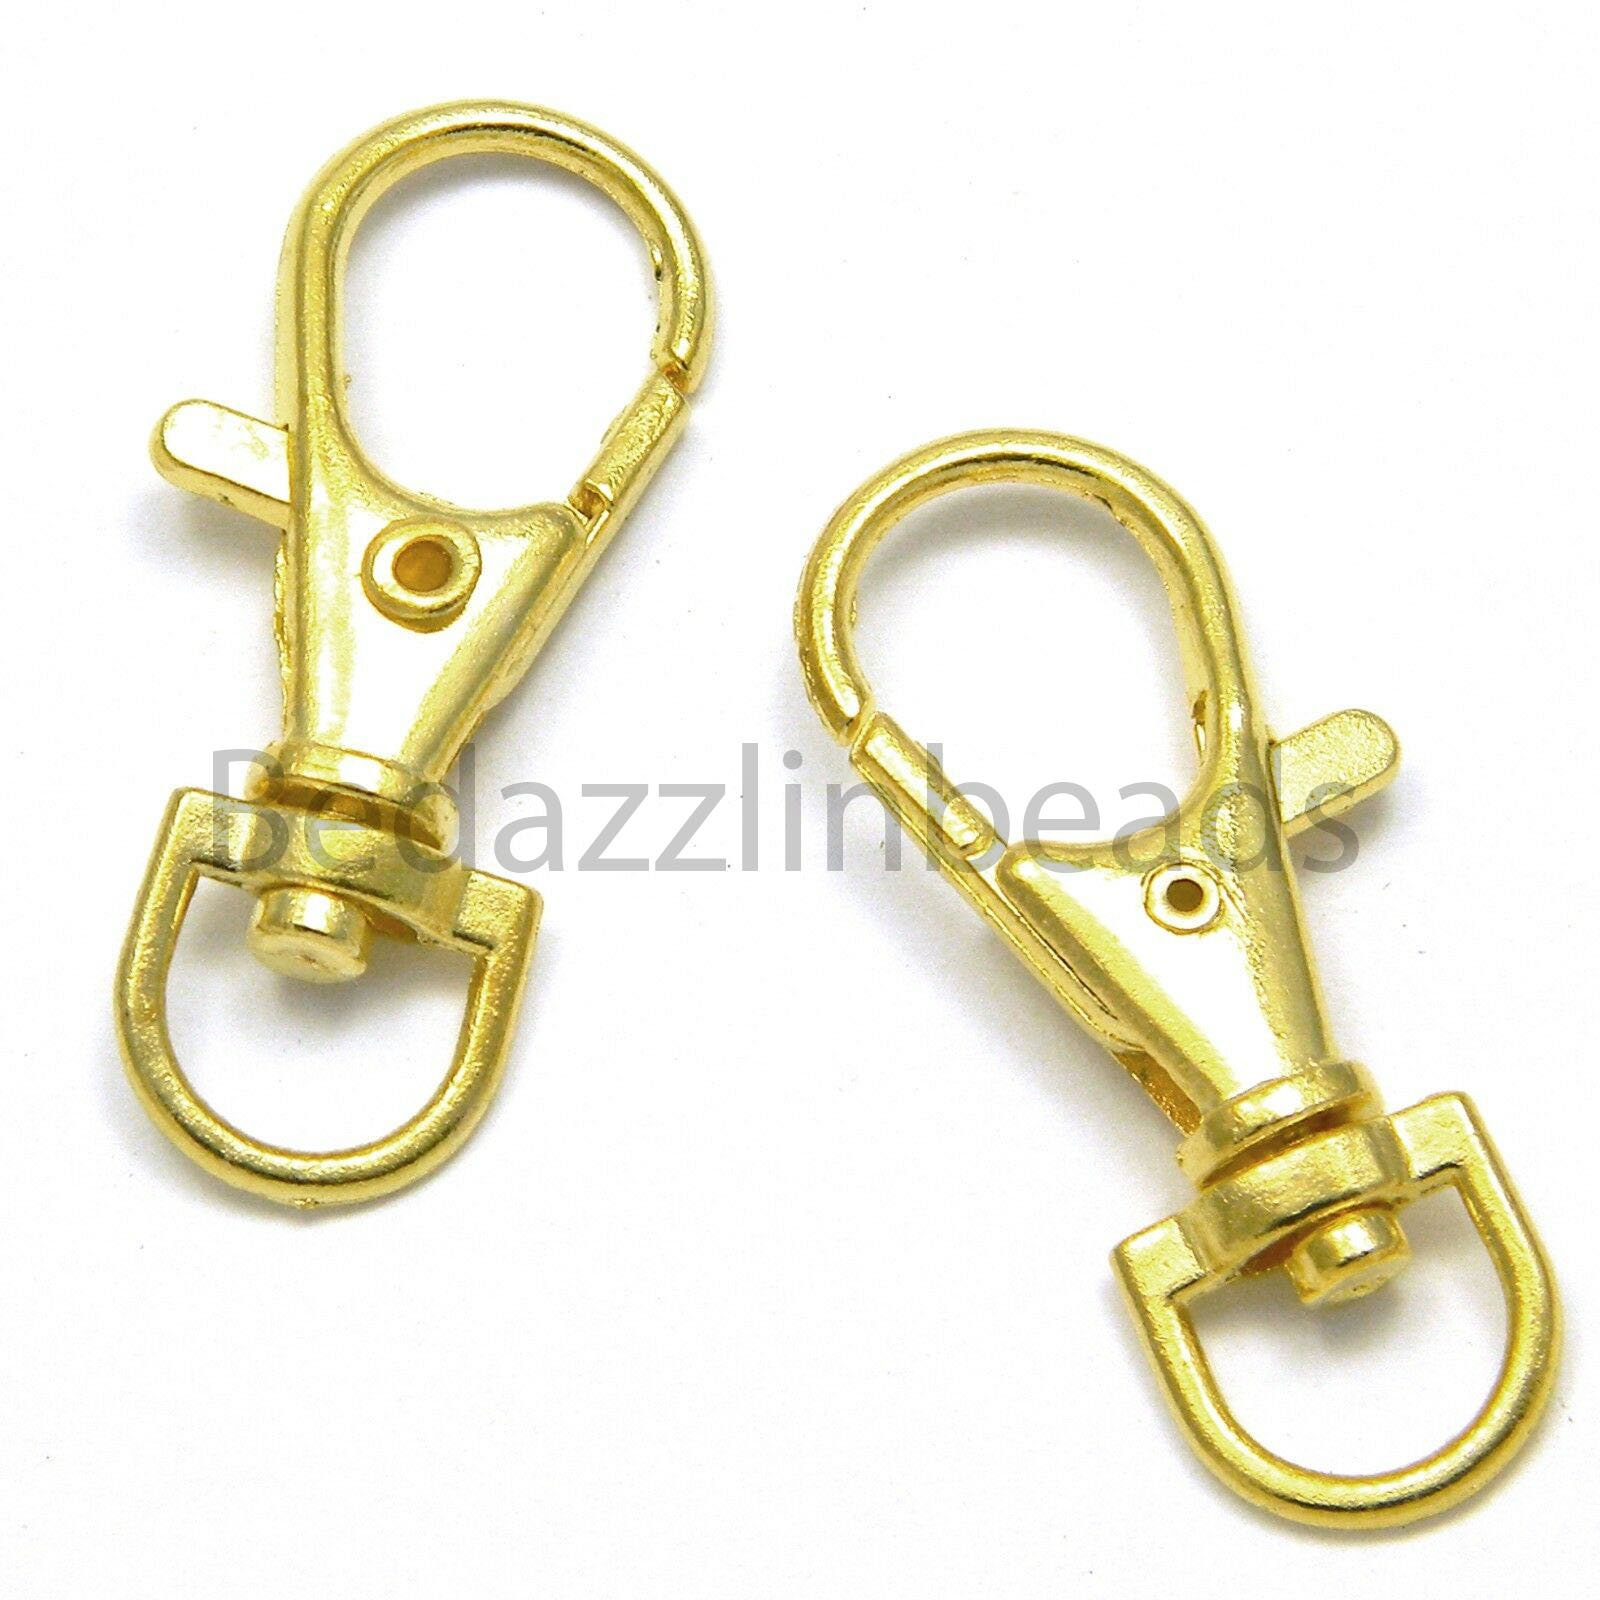 2 Big 1 1/2 Inch Swivel Lobster Clasp Clip Hook Findings for